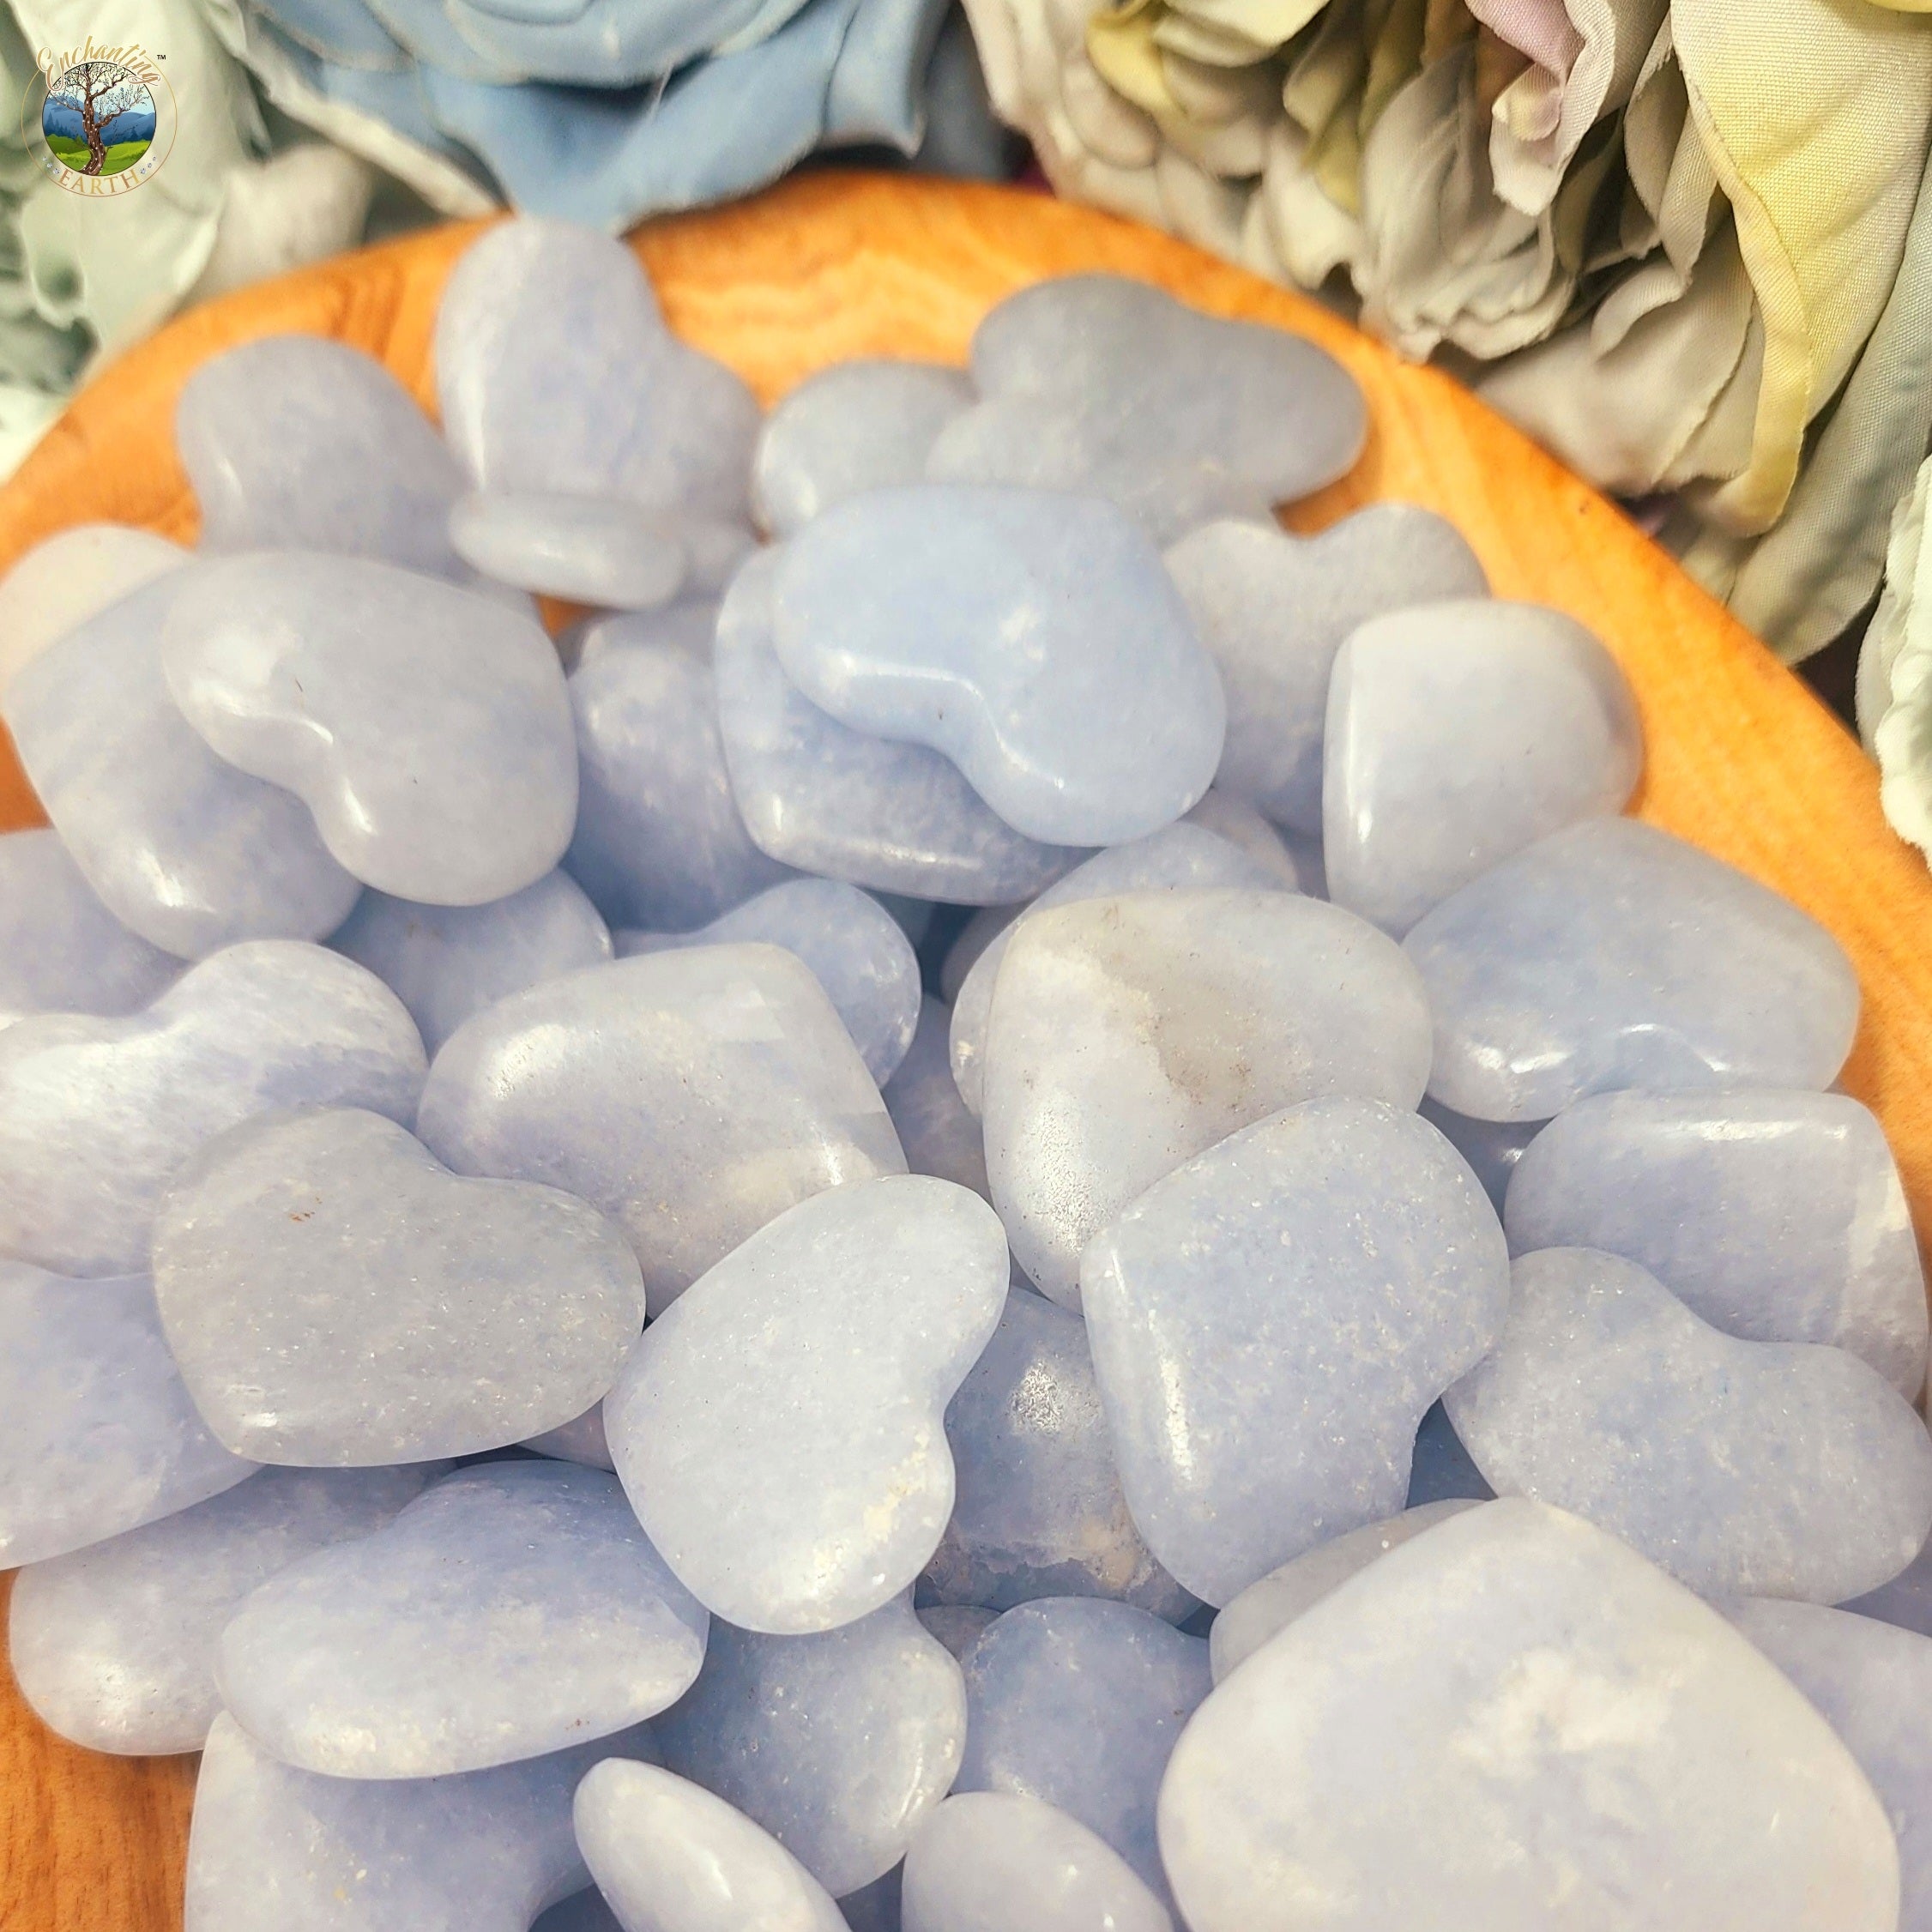 Blue Calcite Heart for Inspiration and Soothing Emotions